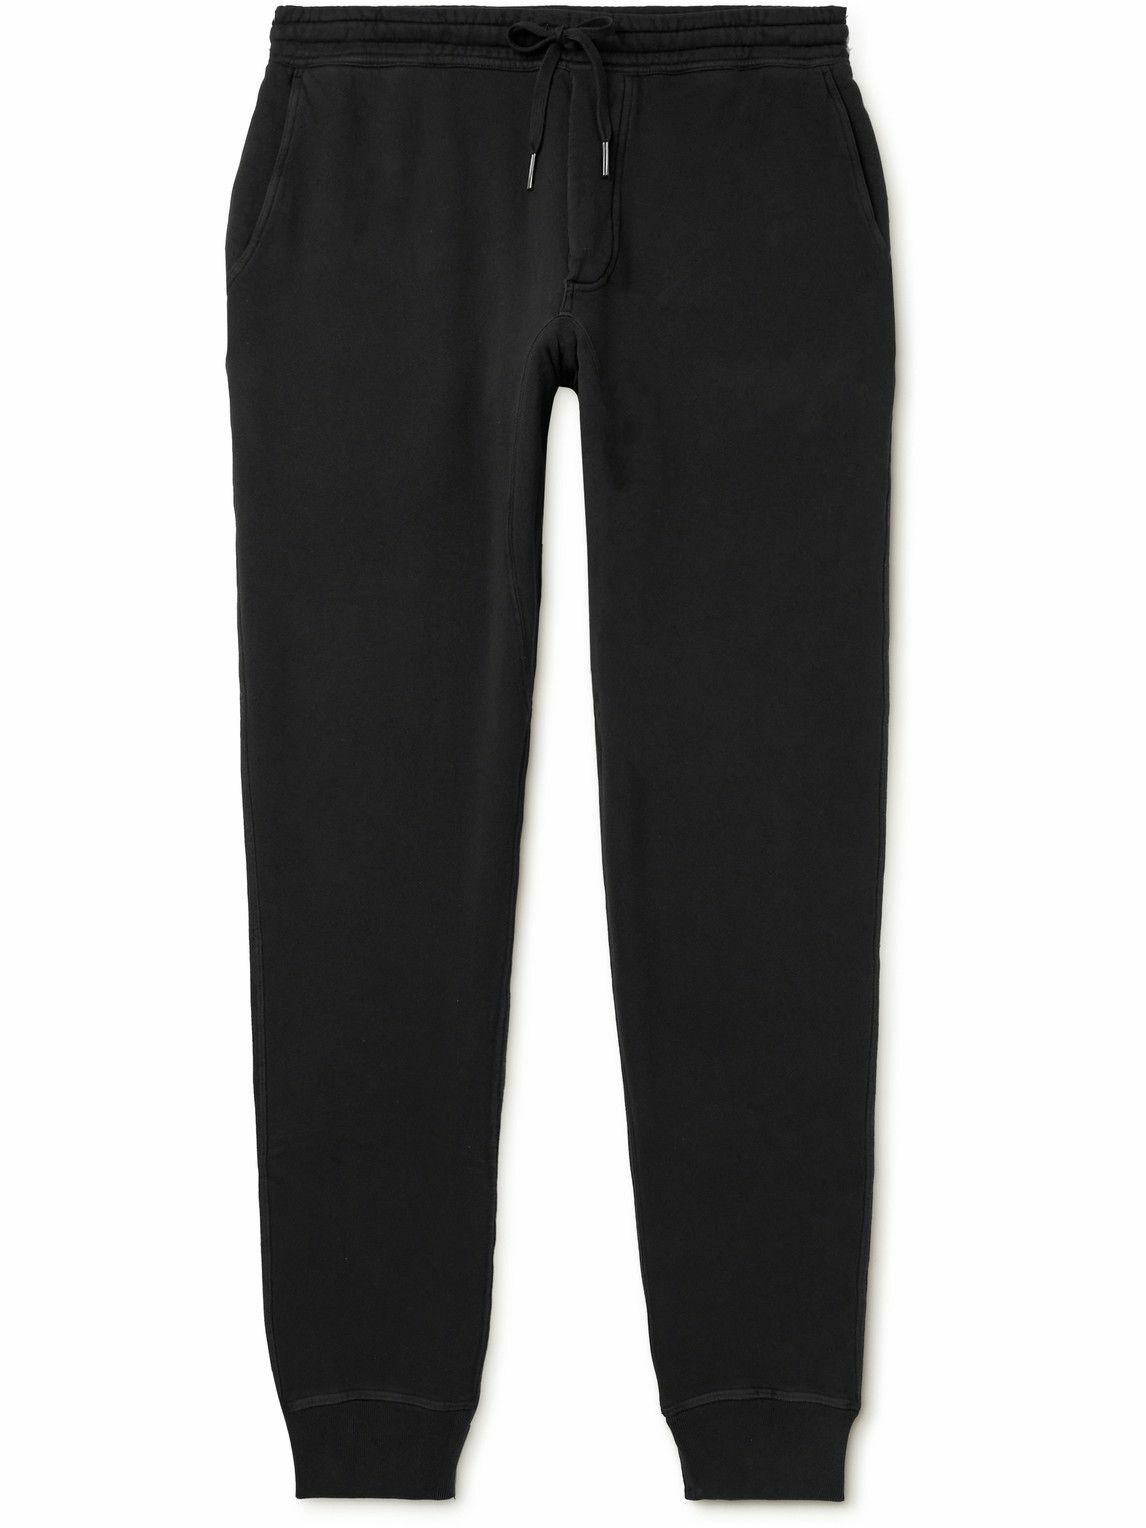 TOM FORD - Tapered Garment-Dyed Cotton-Jersey Sweatpants - Black TOM FORD